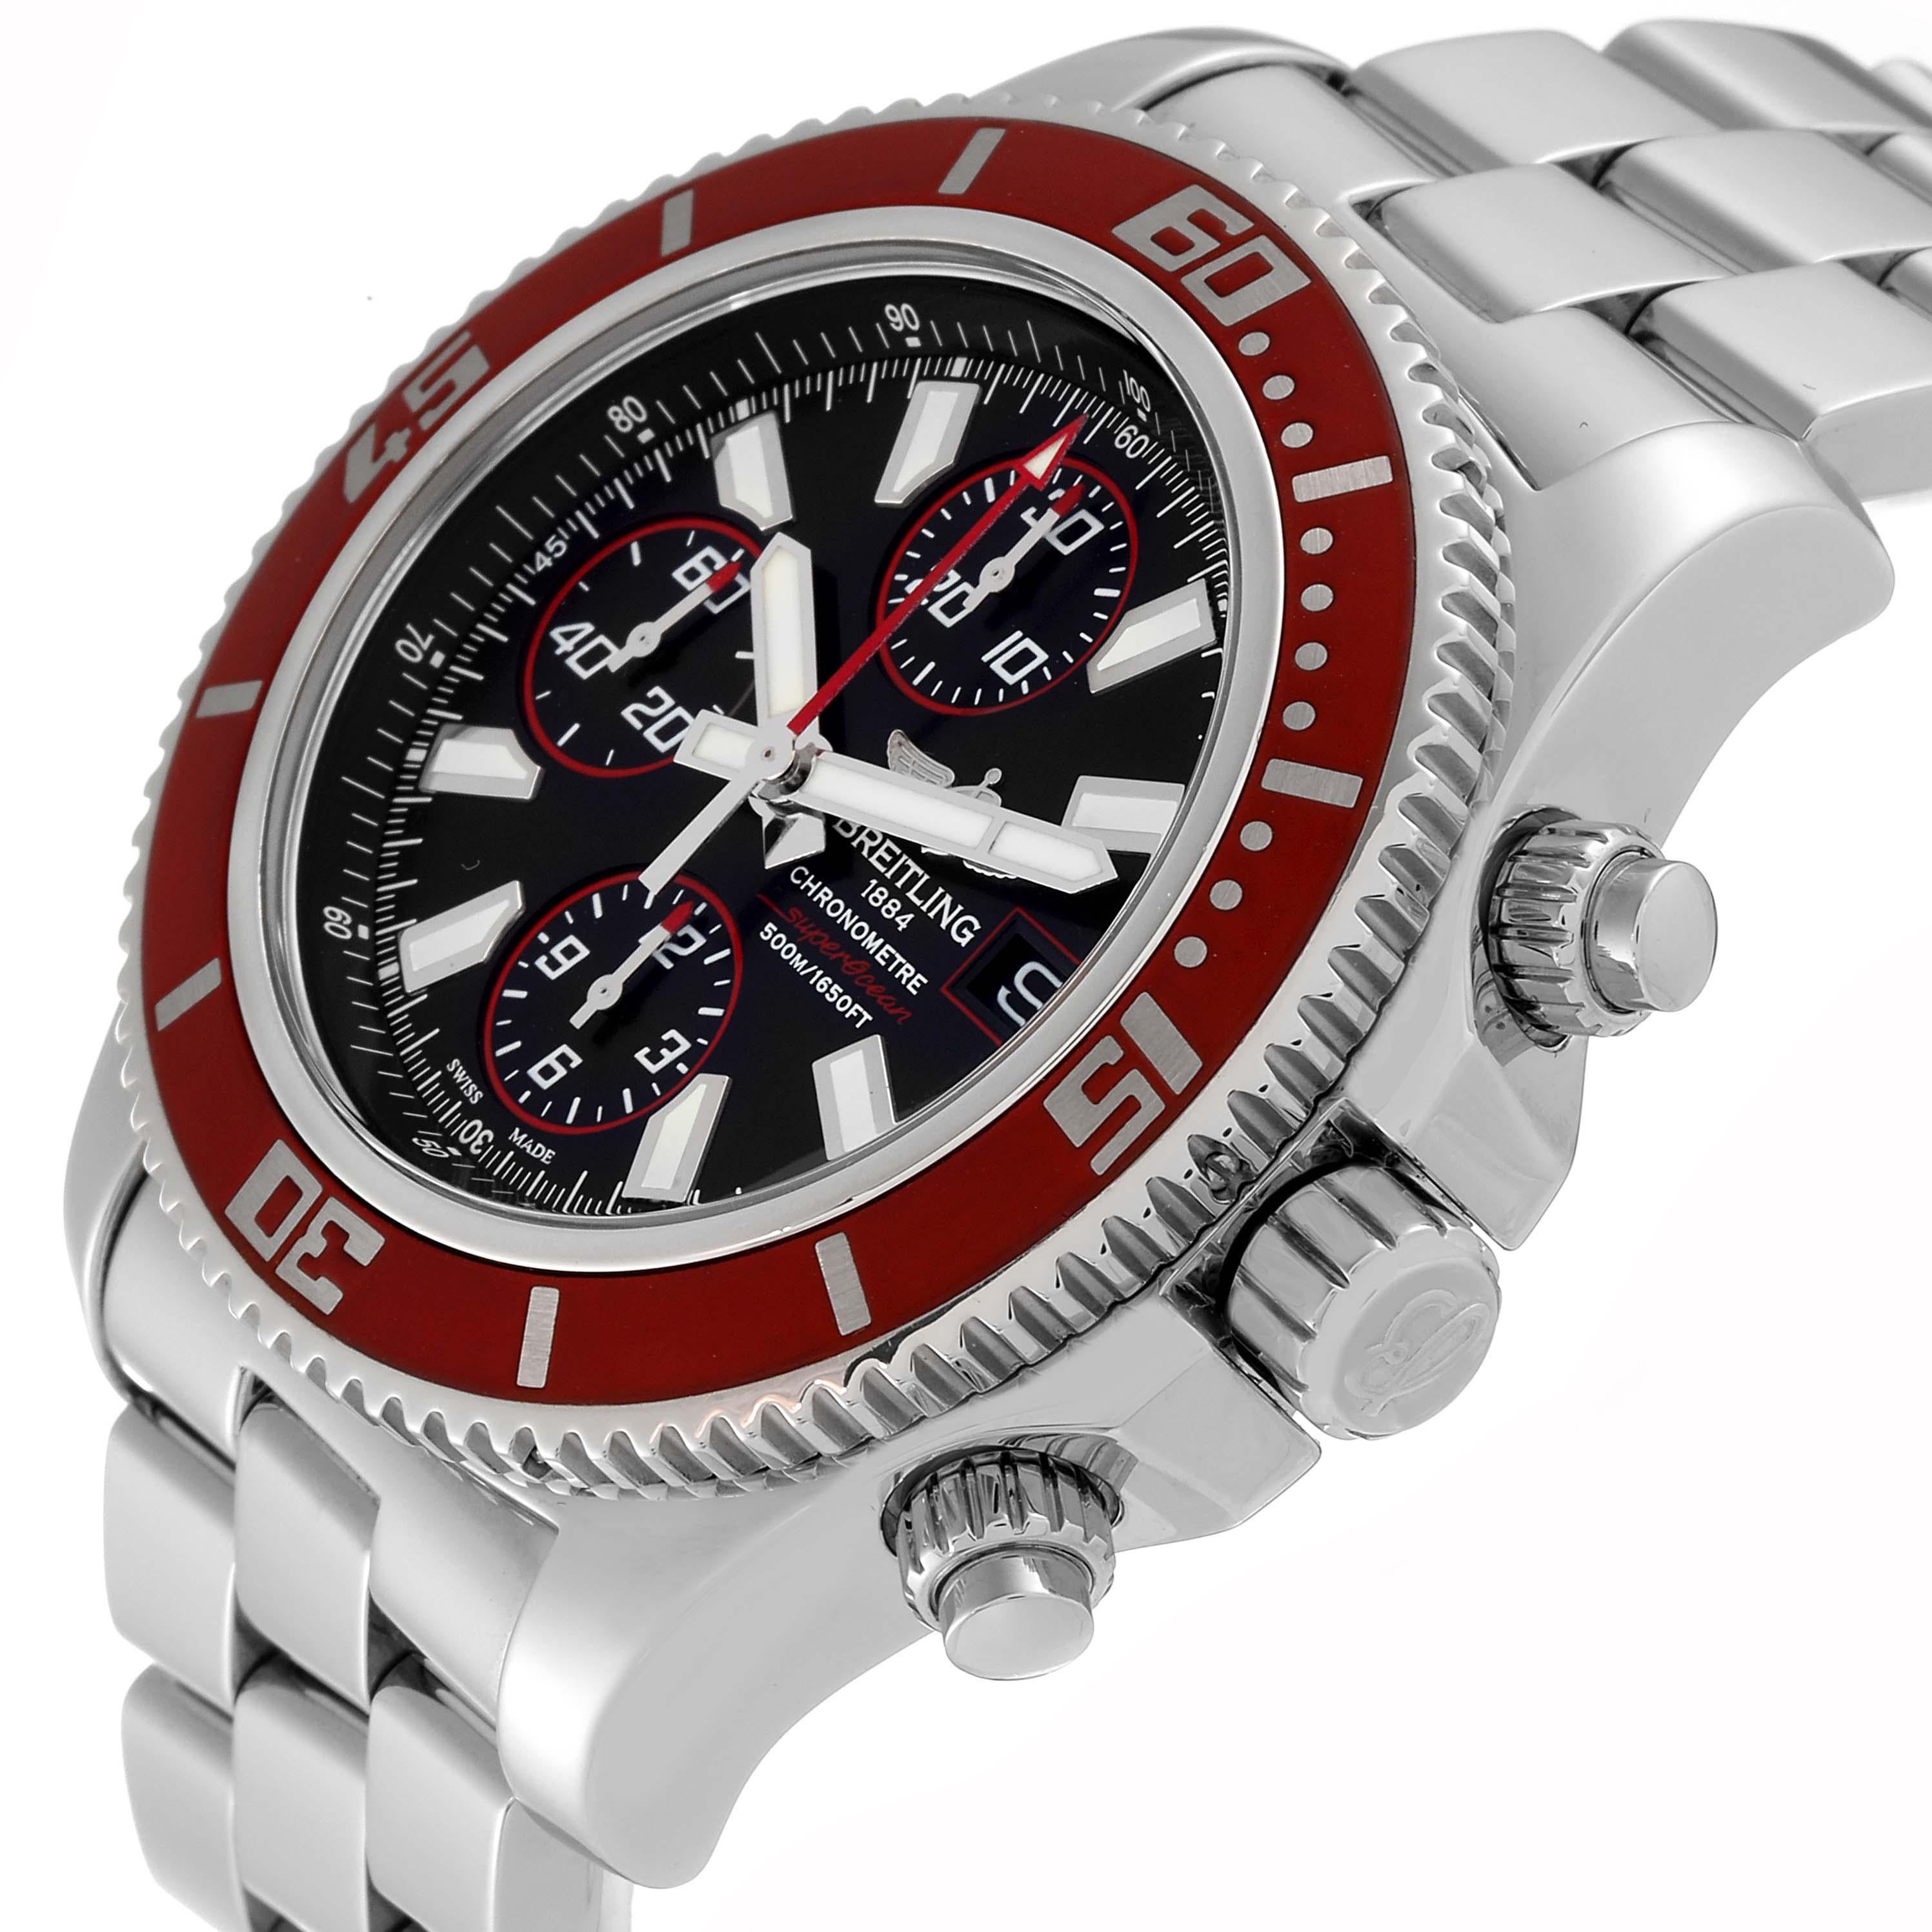 Breitling Aeromarine SuperOcean II Red Bezel Limited Edition Mens Watch A13341 For Sale 1